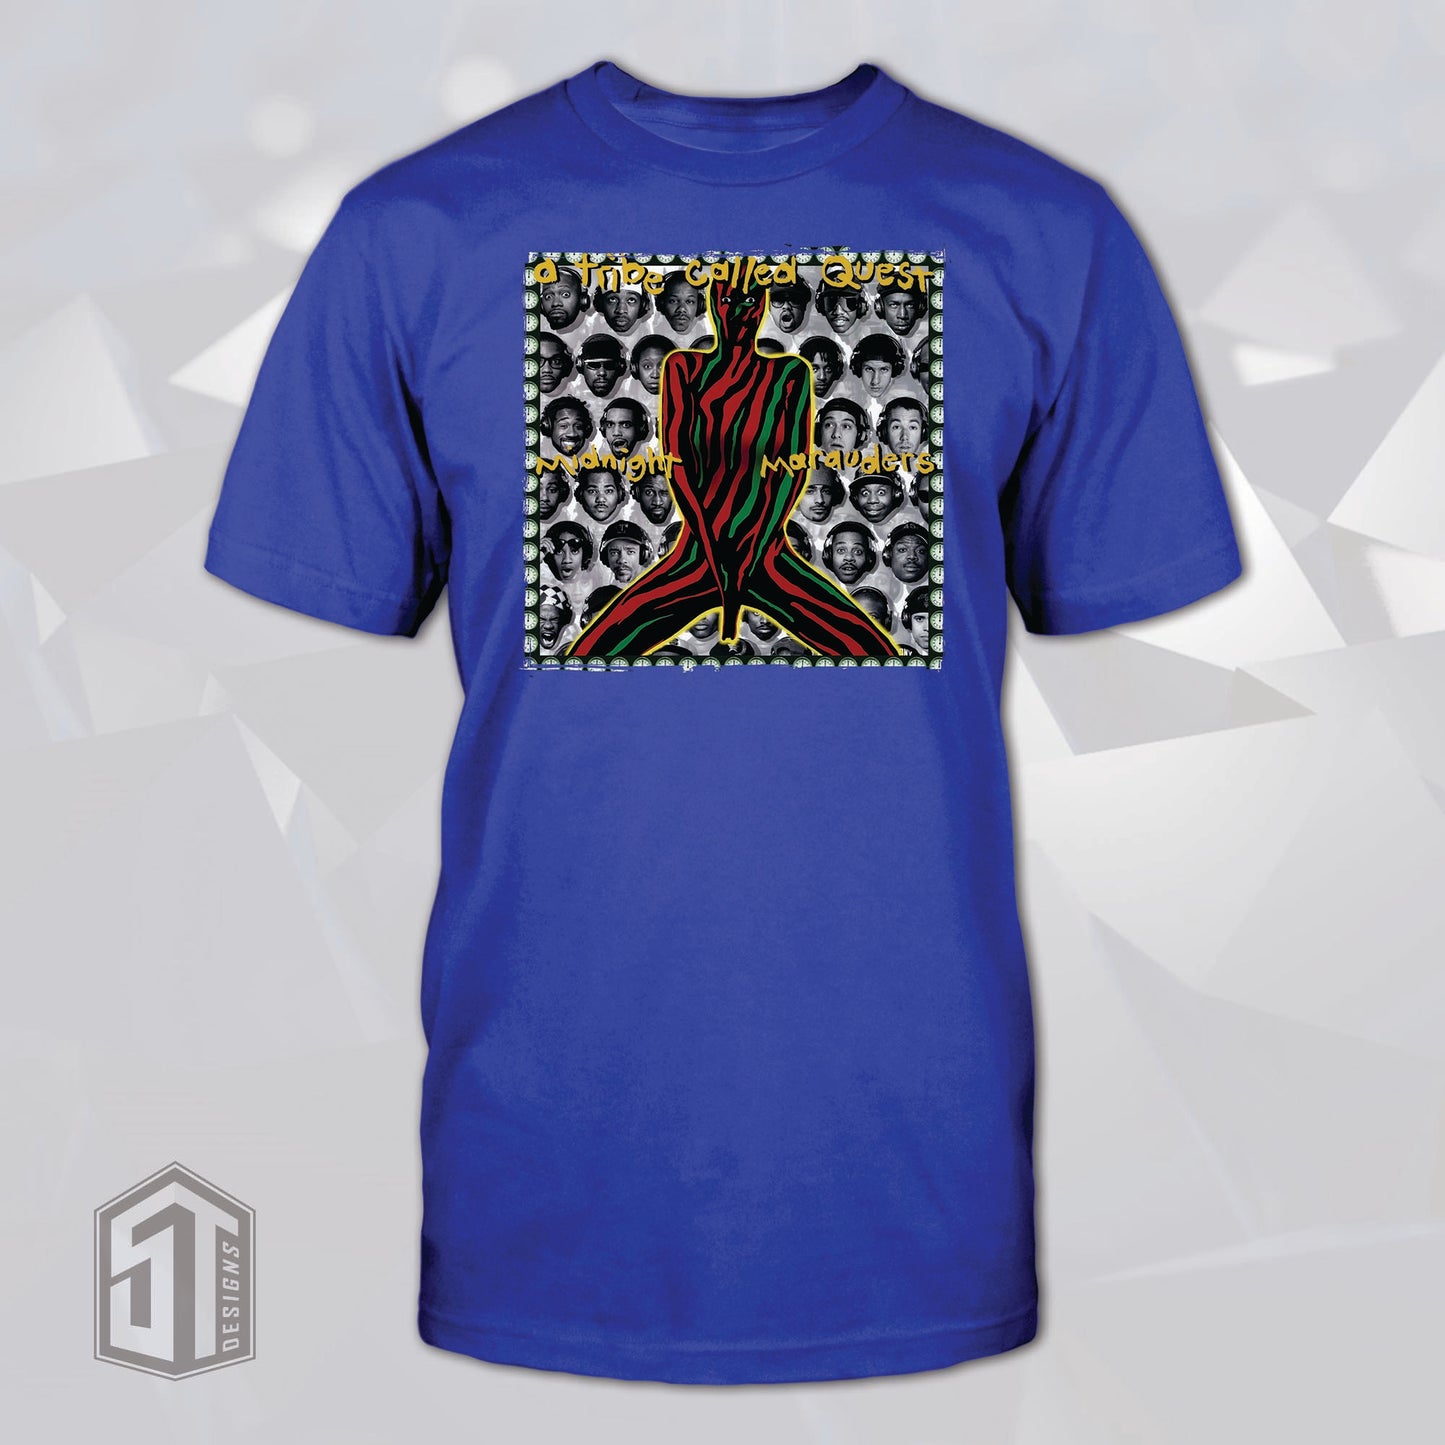 Midnight Marauders Tee - Tribe Called Quest